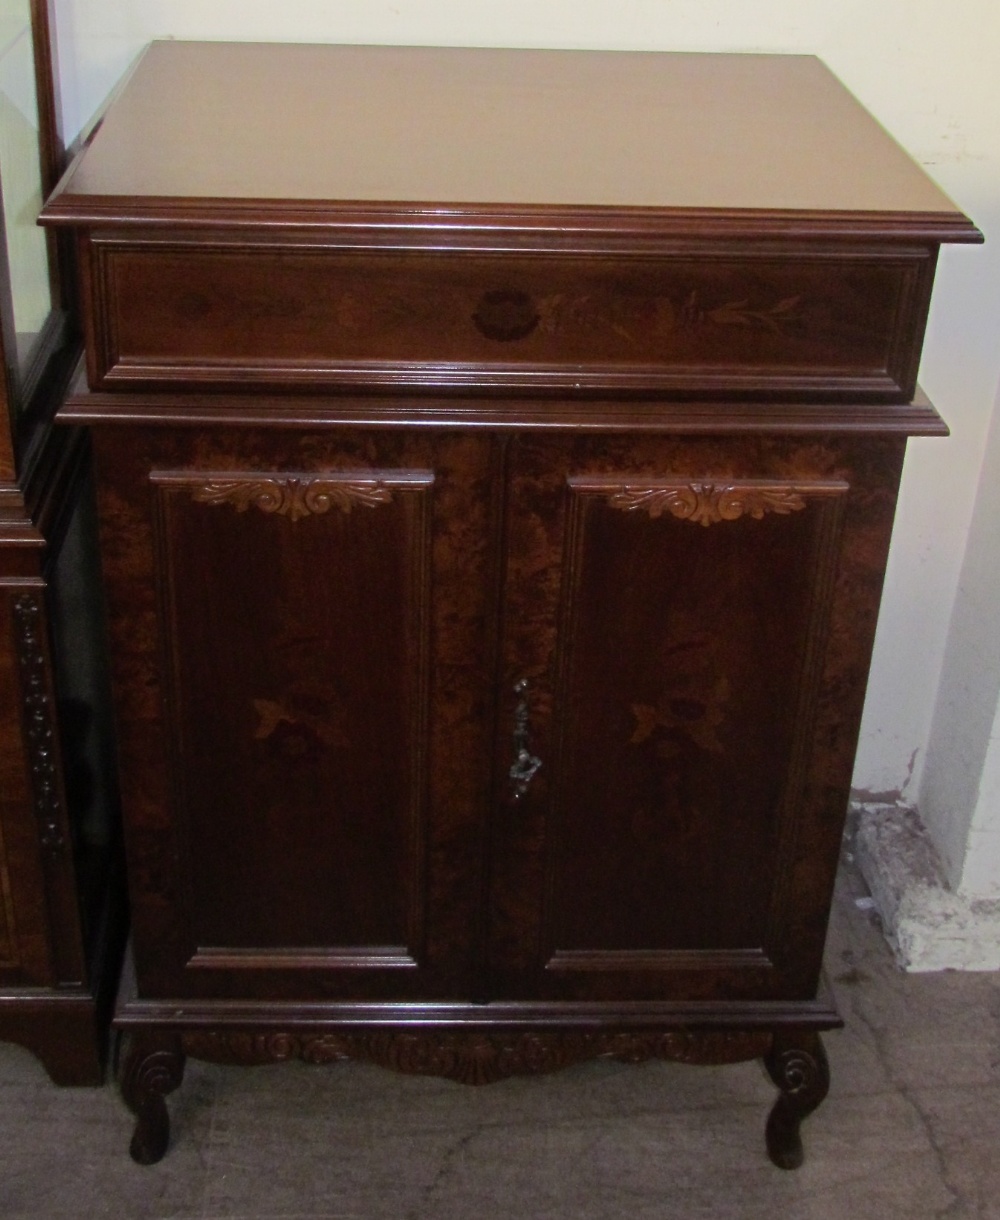 A 20th century mahogany bookcase with a moulded cornice above a pair of glazed doors, - Image 3 of 3